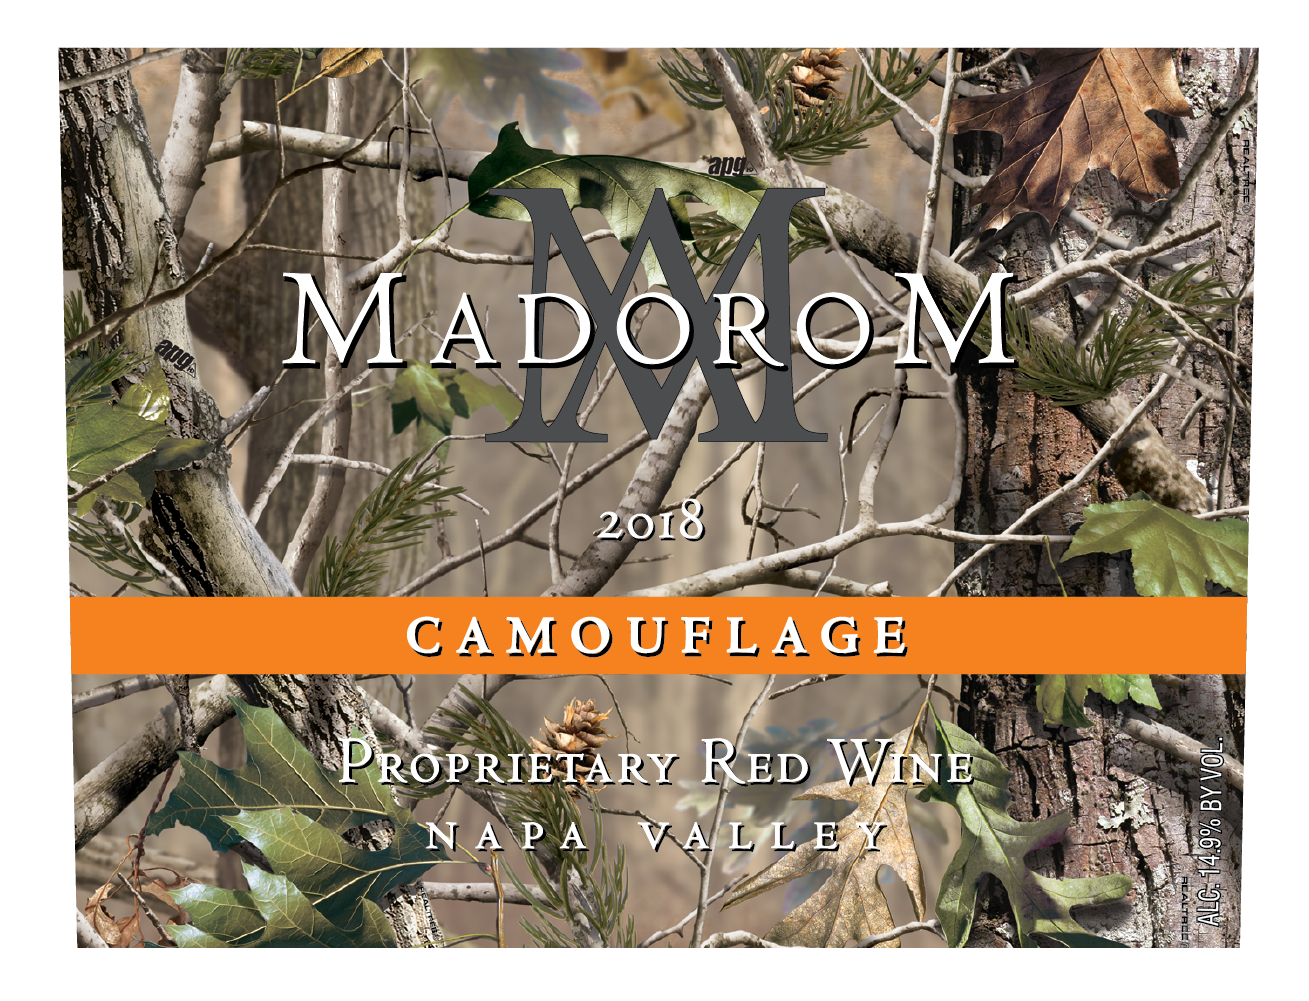 Product Image for 2018 MadoroM Napa Valley Camouflage Proprietary Red Blend 3.0L